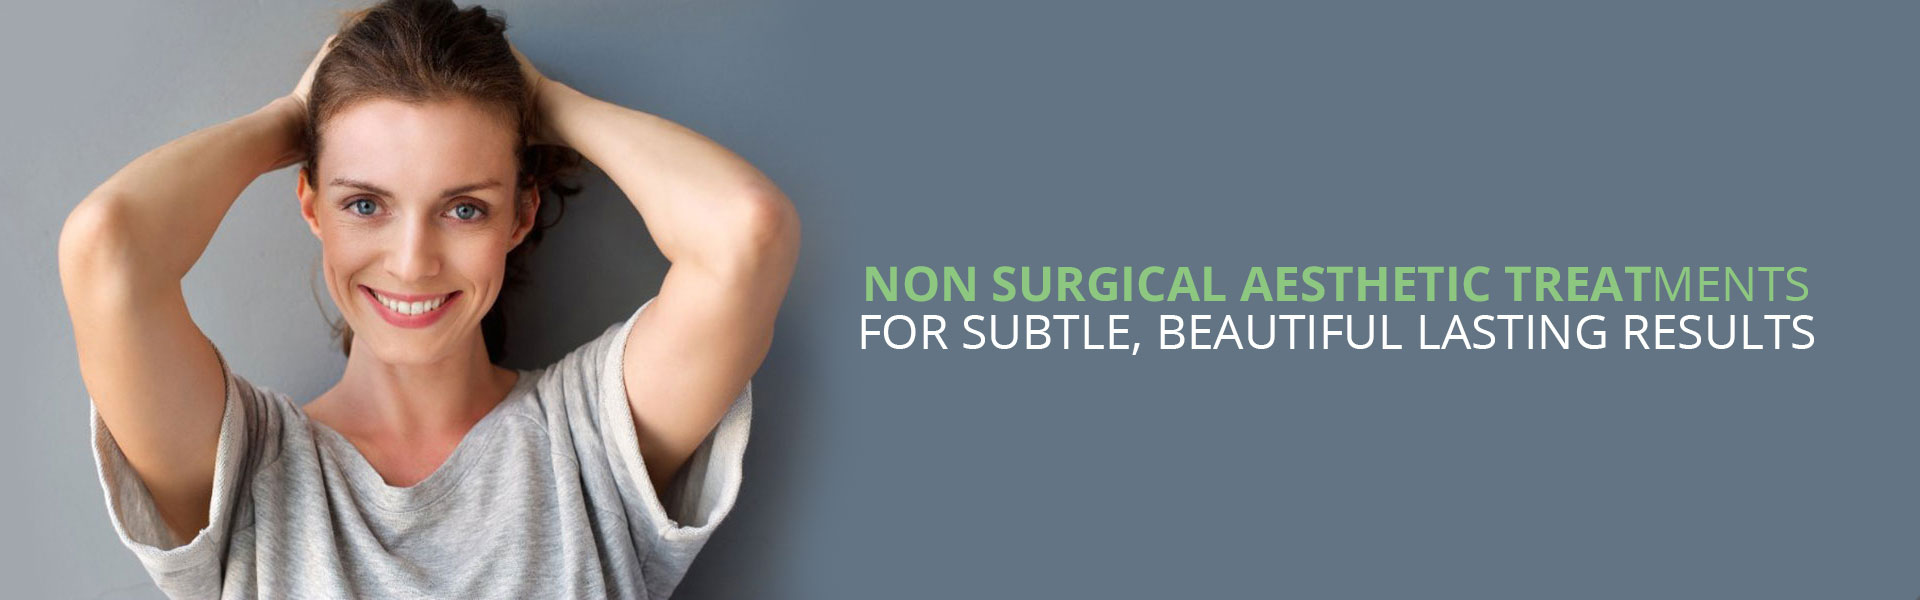 NON SURGICAL AESTHETIC TREATMENTS Southampton FOR SUBTLE BEAUTIFUL LASTING RESULTS